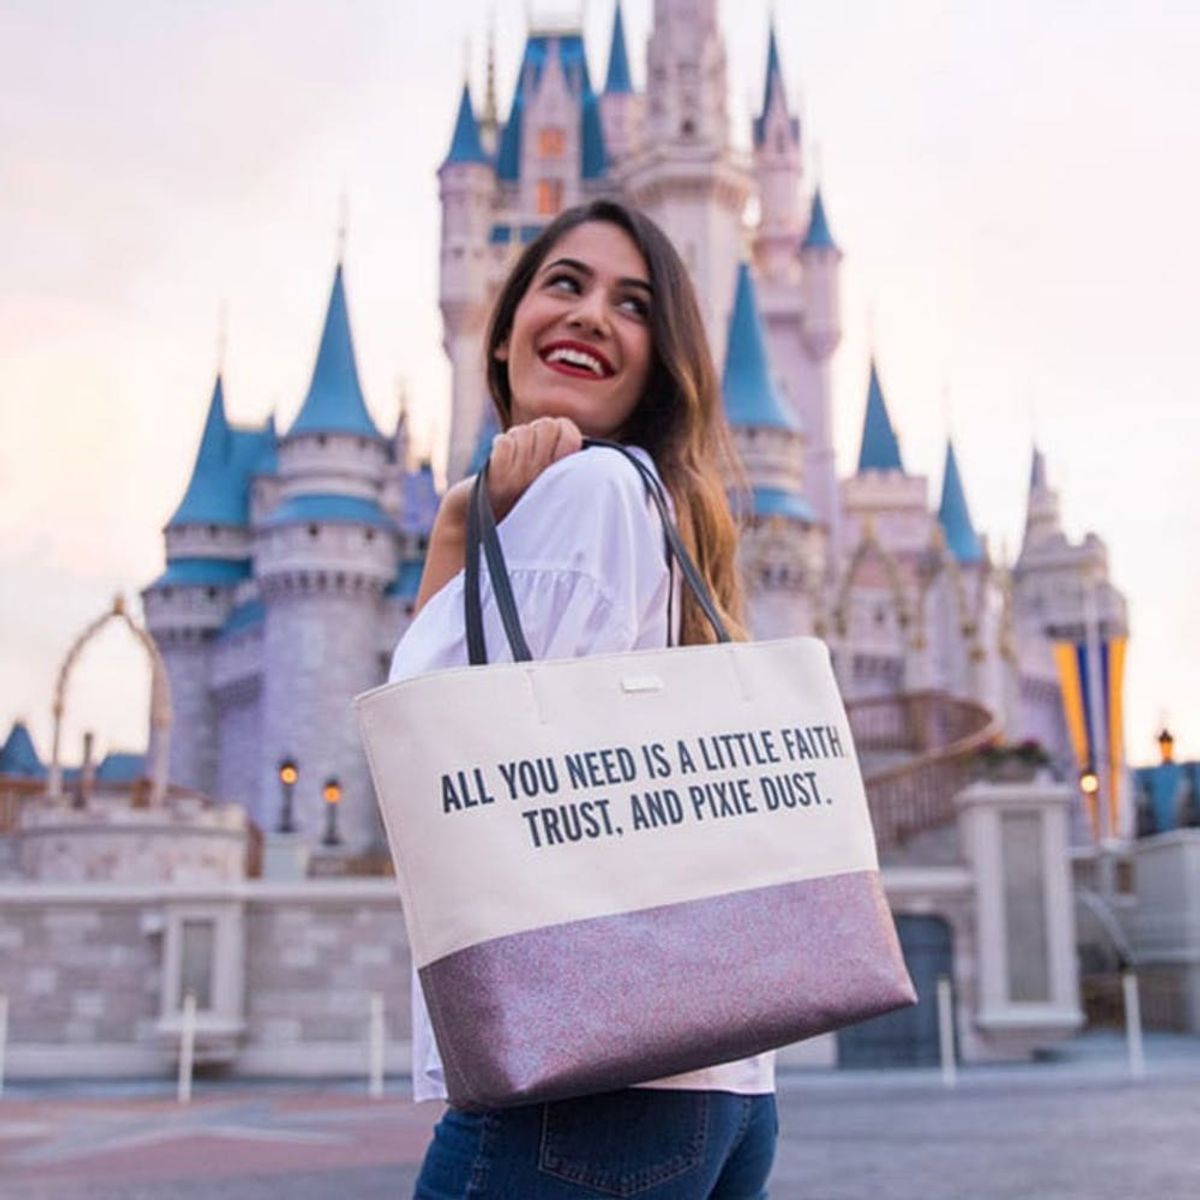 Kate Spade New York Dropped a New Disney Bag Collection We All Need